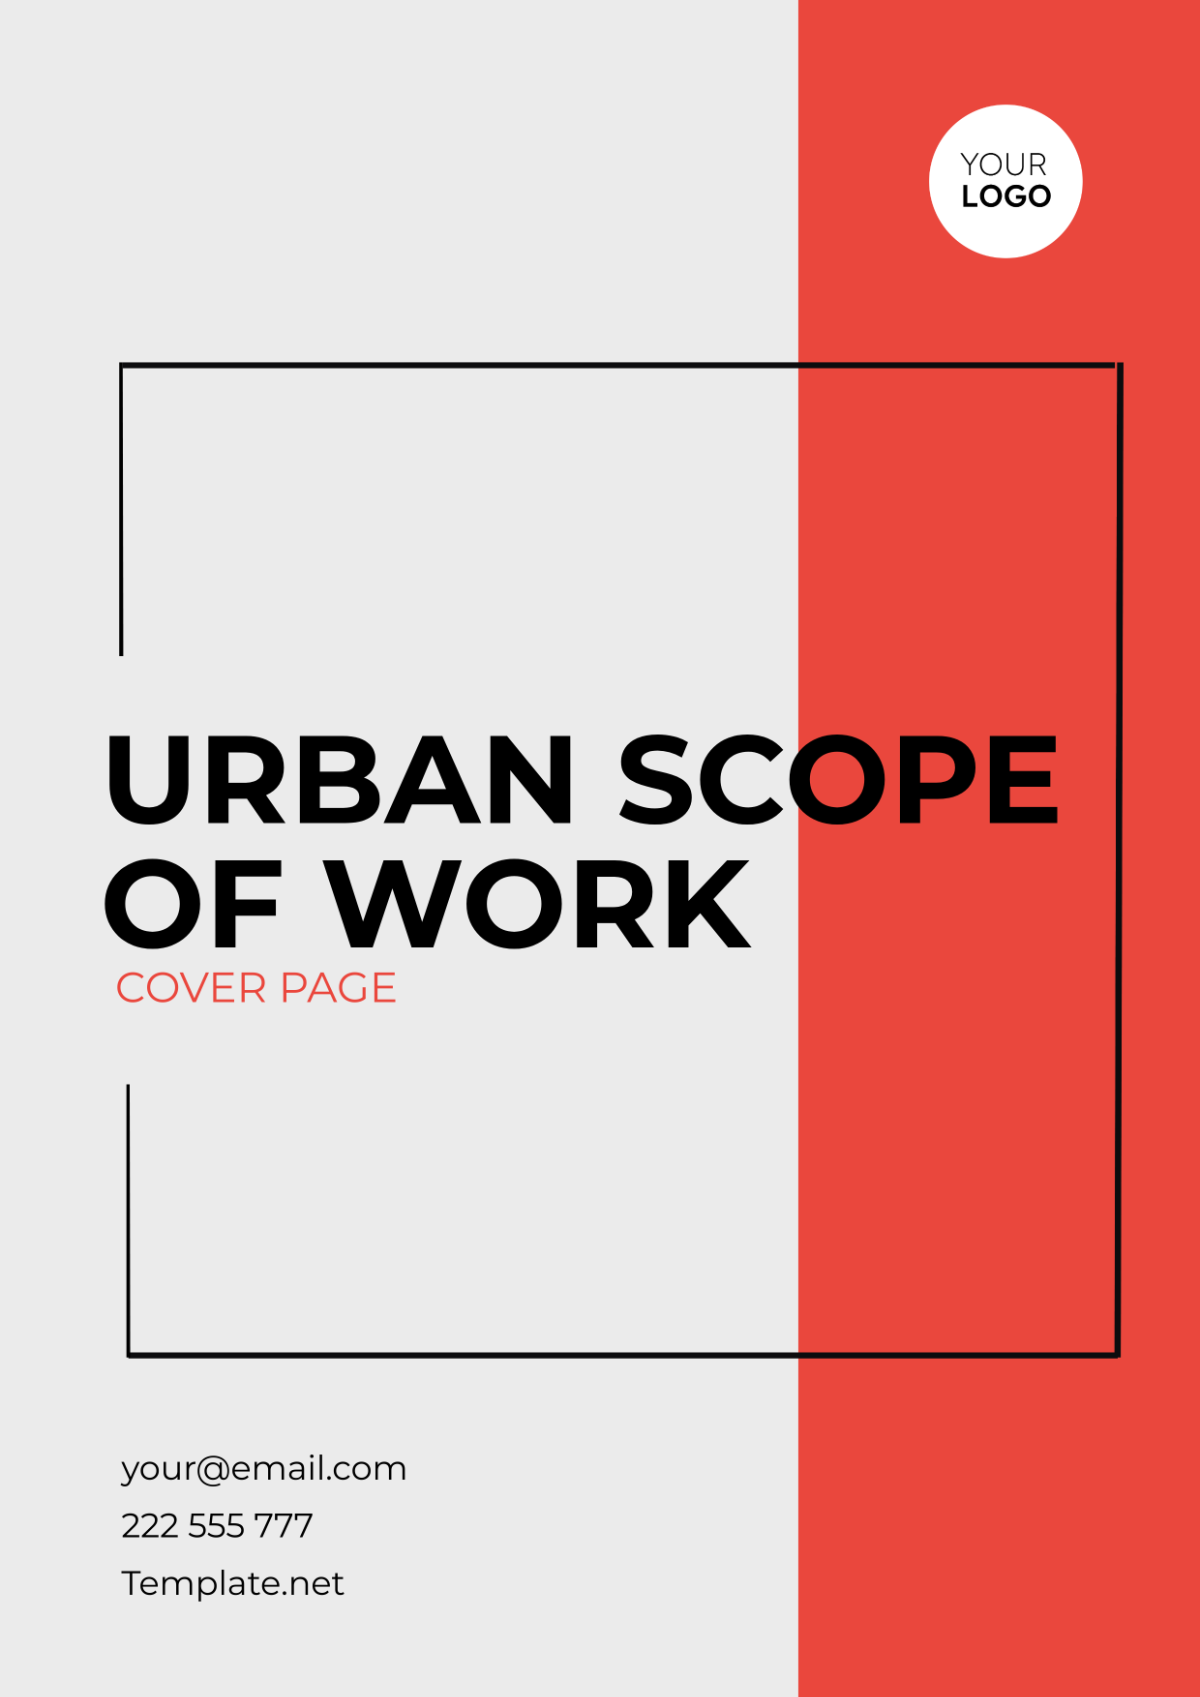 Urban Scope of Work Cover Page Template